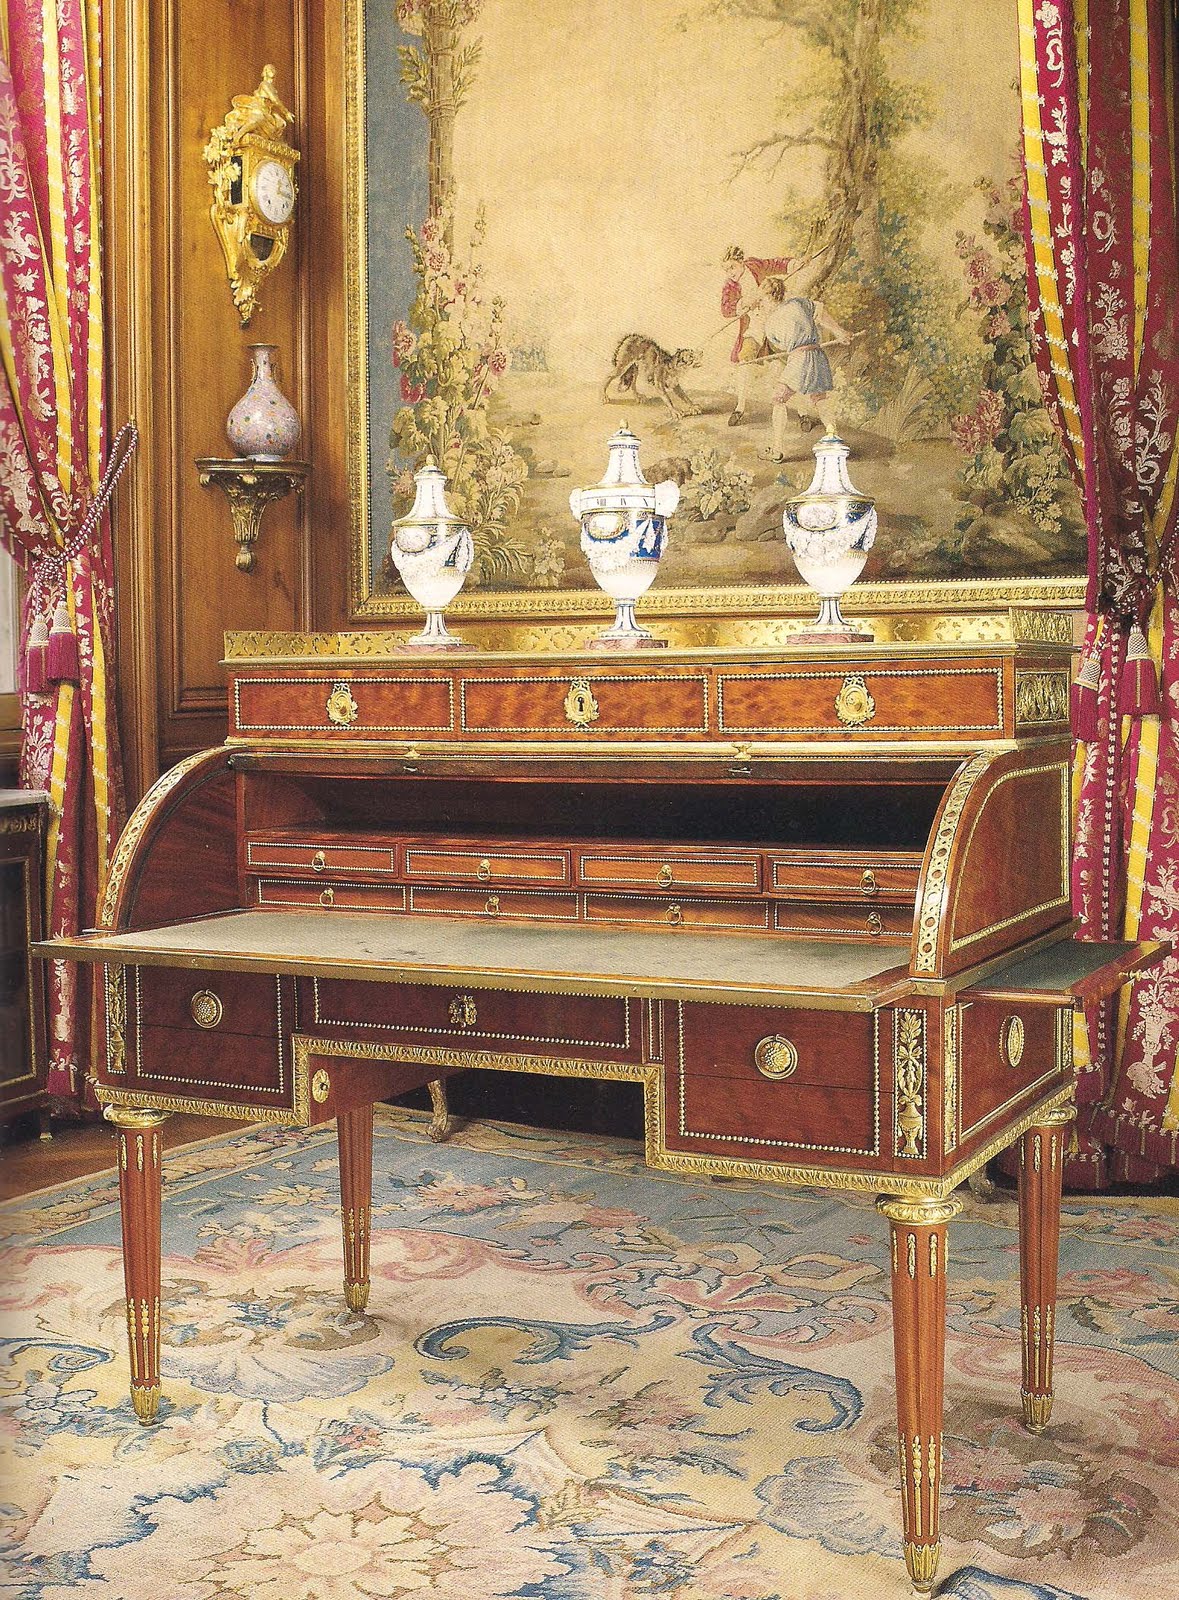 The Devoted Classicist: Highlights of the Camondo Collection